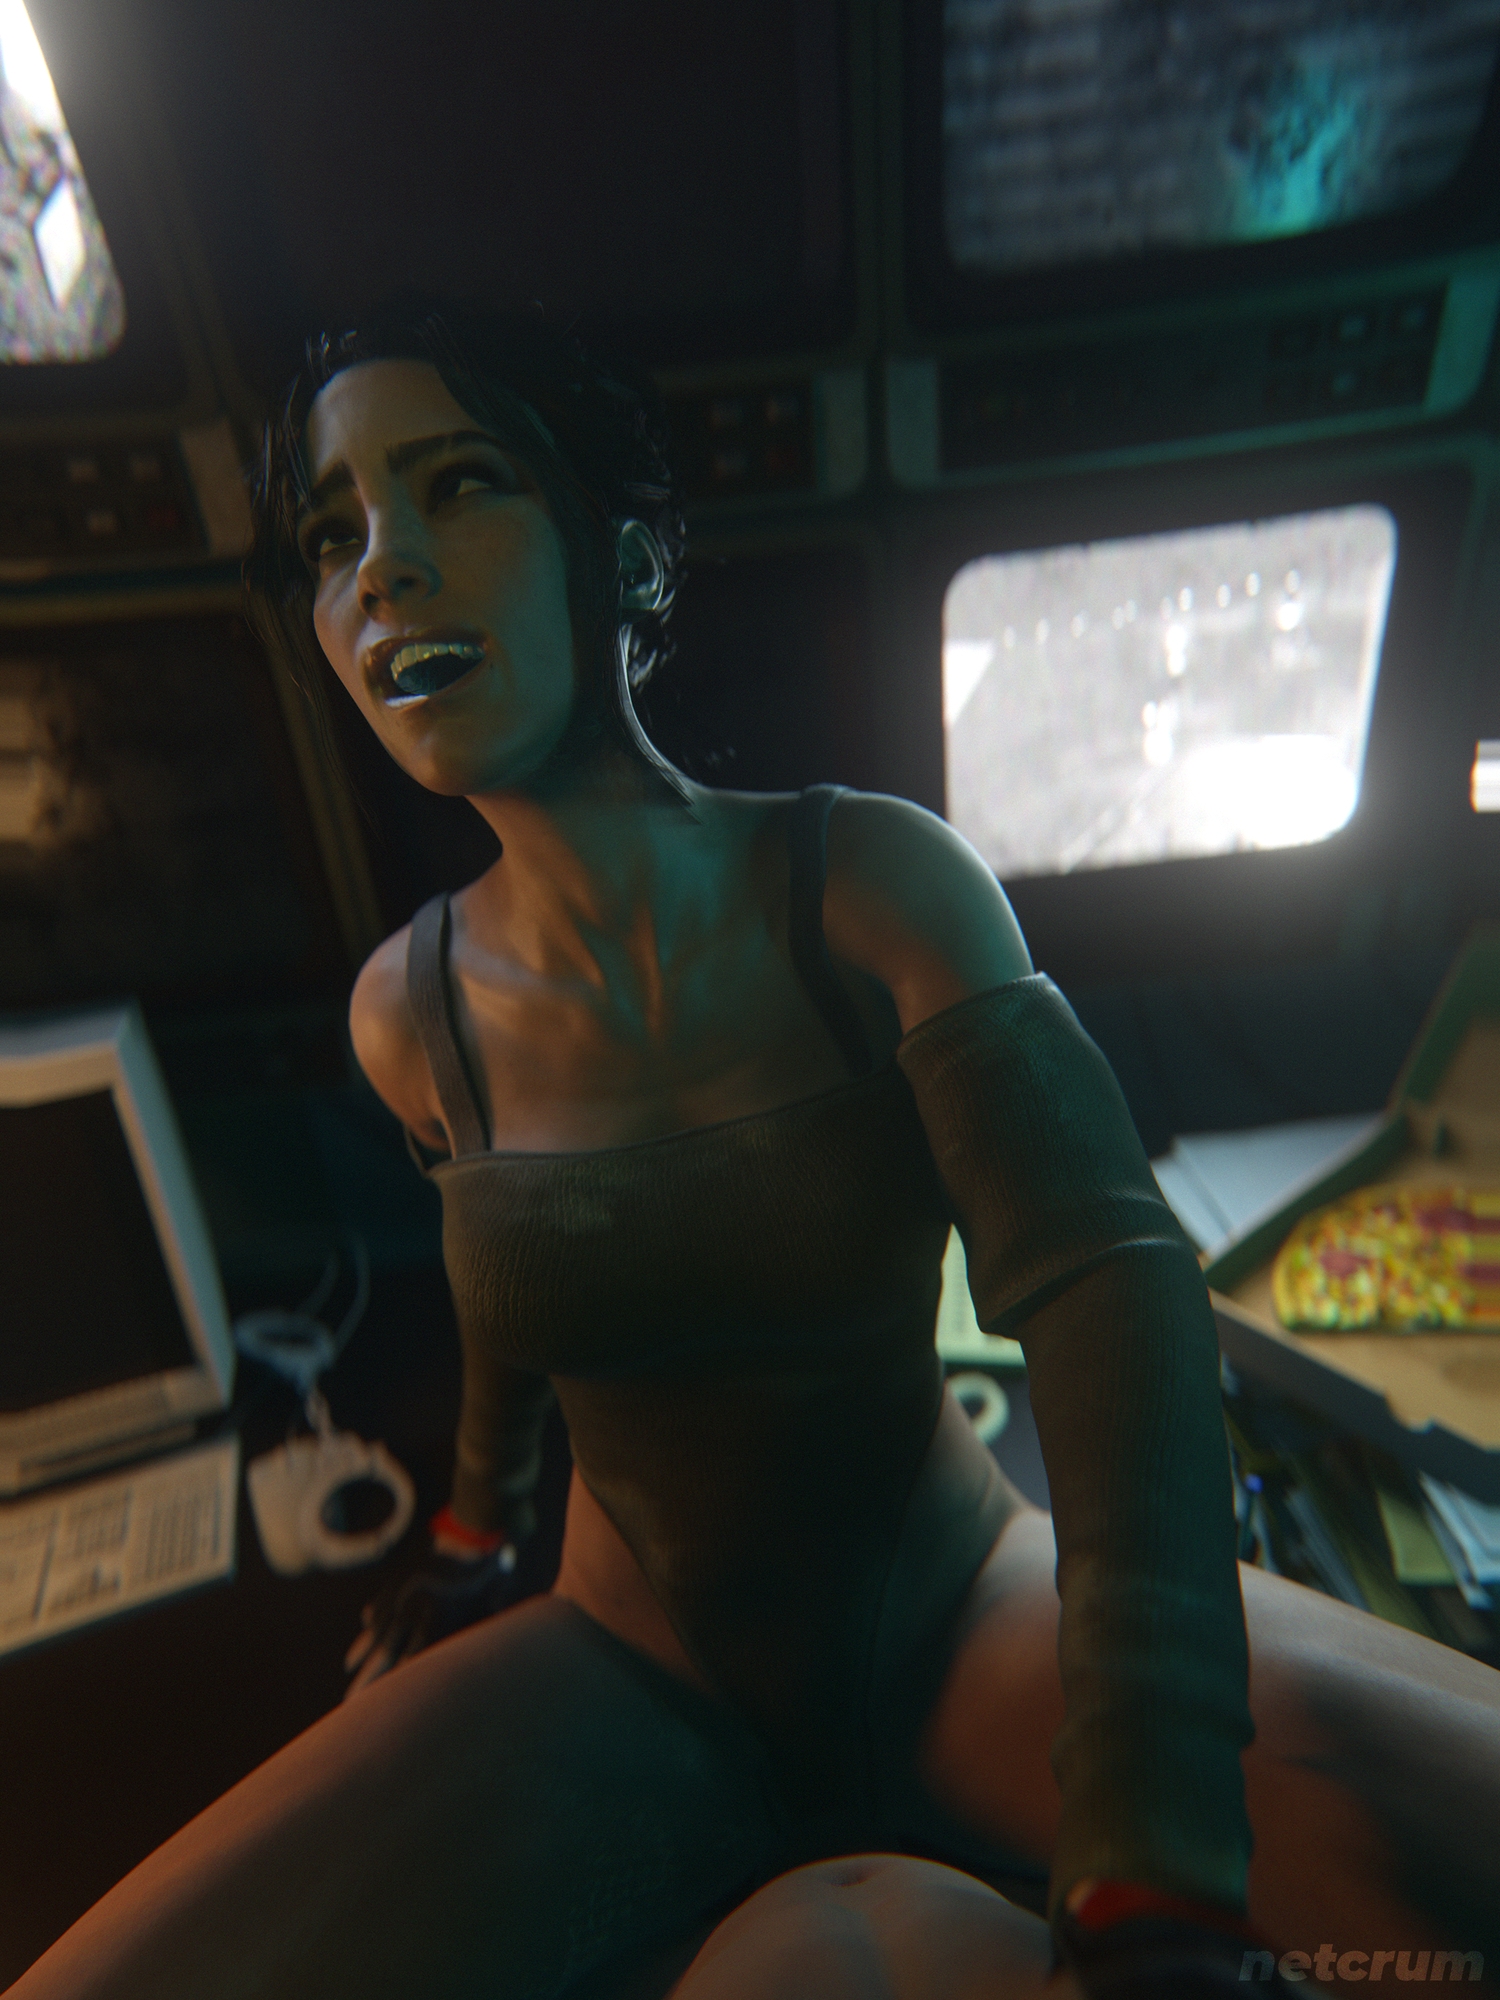 Panams Alternate Mission Panam Palmer Cyberpunk2077 Cyberpunk Big Tits Big Cock Big Breasts Big Dick Big penis Big Boobs Natural Boobs Natural Tits Natural Breast Submissive 1boy1girl Smile Open legs Wrapped Legs Interracial Partially_clothed Clothing Clothed Office Vaginal Vaginal Penetration Vaginal Sex Vaginal Insertion Cleavage 7